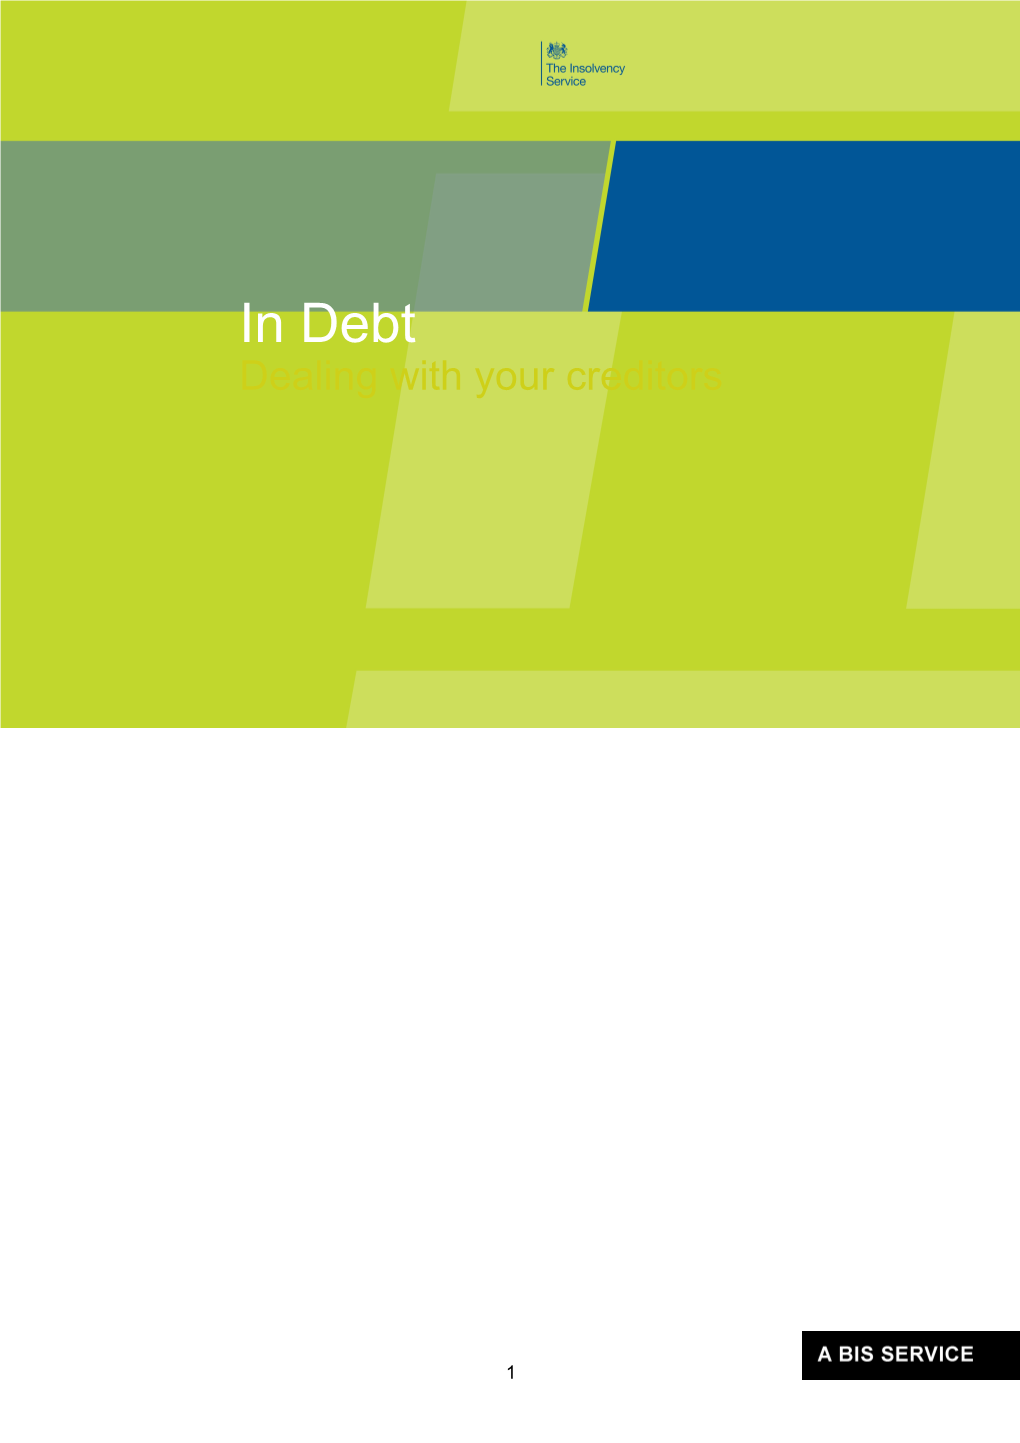 In Debt Dealing with Your Creditors Feb 2011